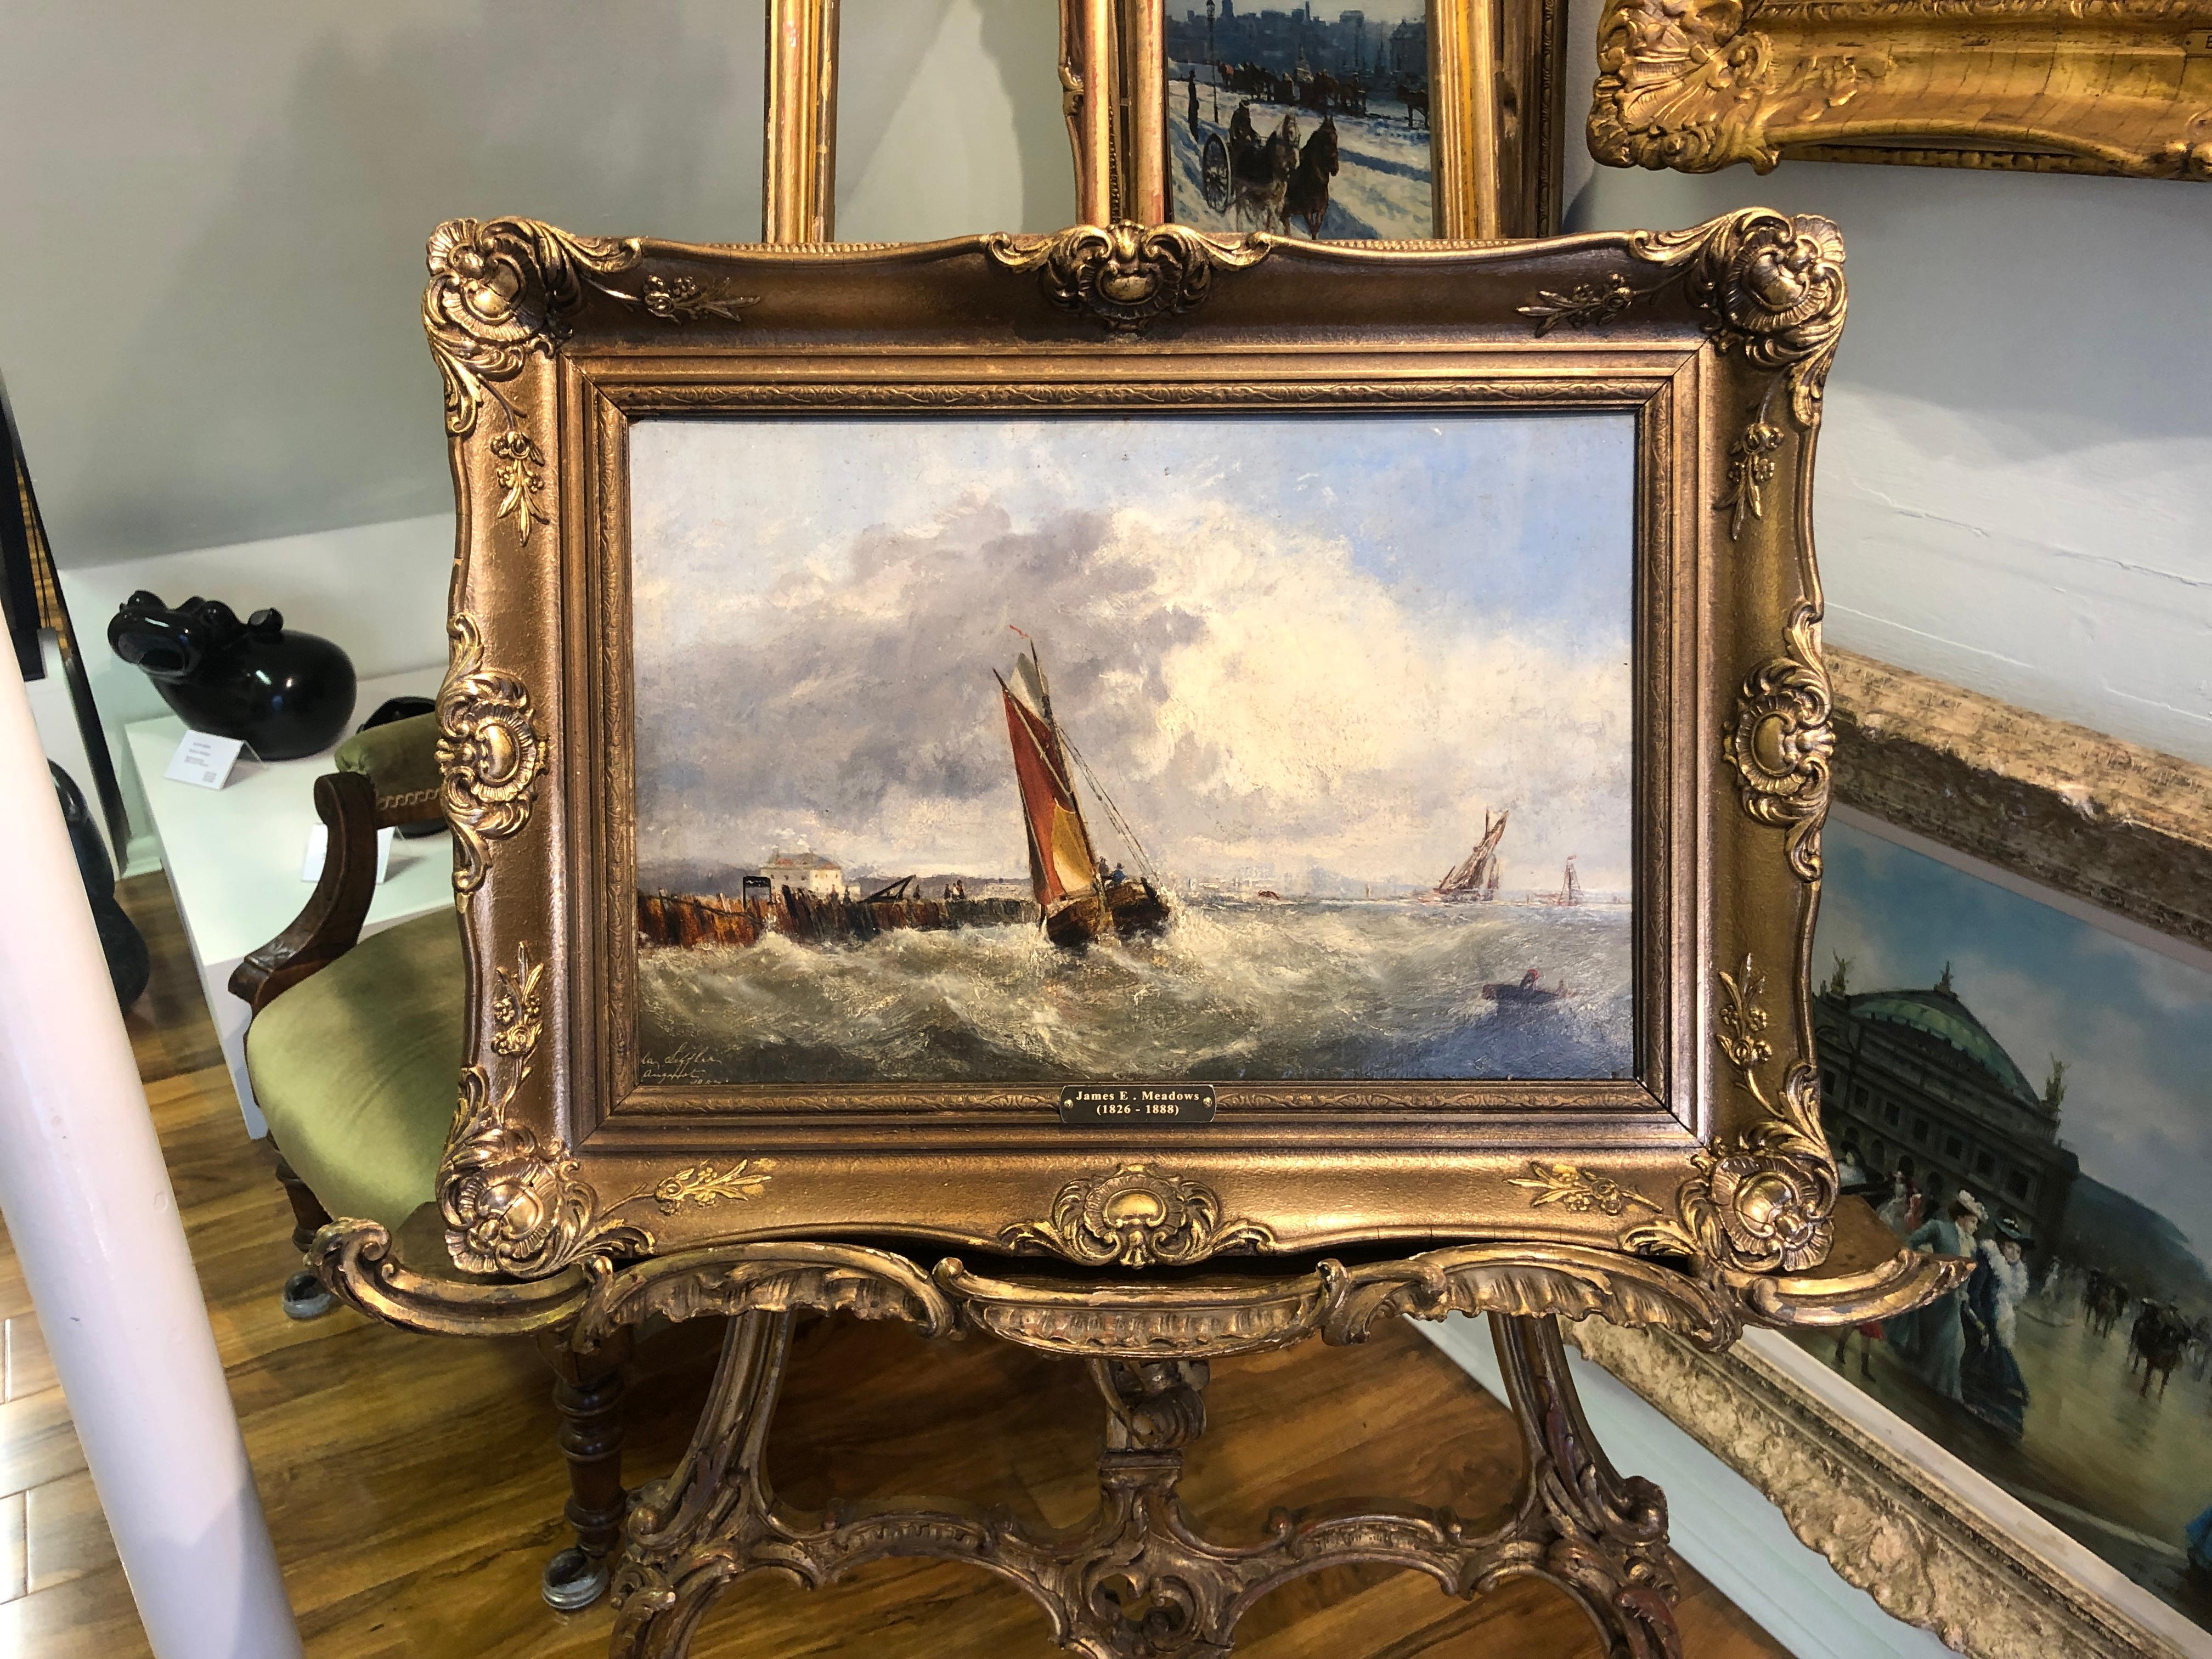 OLD MASTER OIL PAINTING High Quality 19th CENTURY SturY Stormy Seas Gold vergoldeter Rahmen (Realismus), Painting, von James Edward Meadows